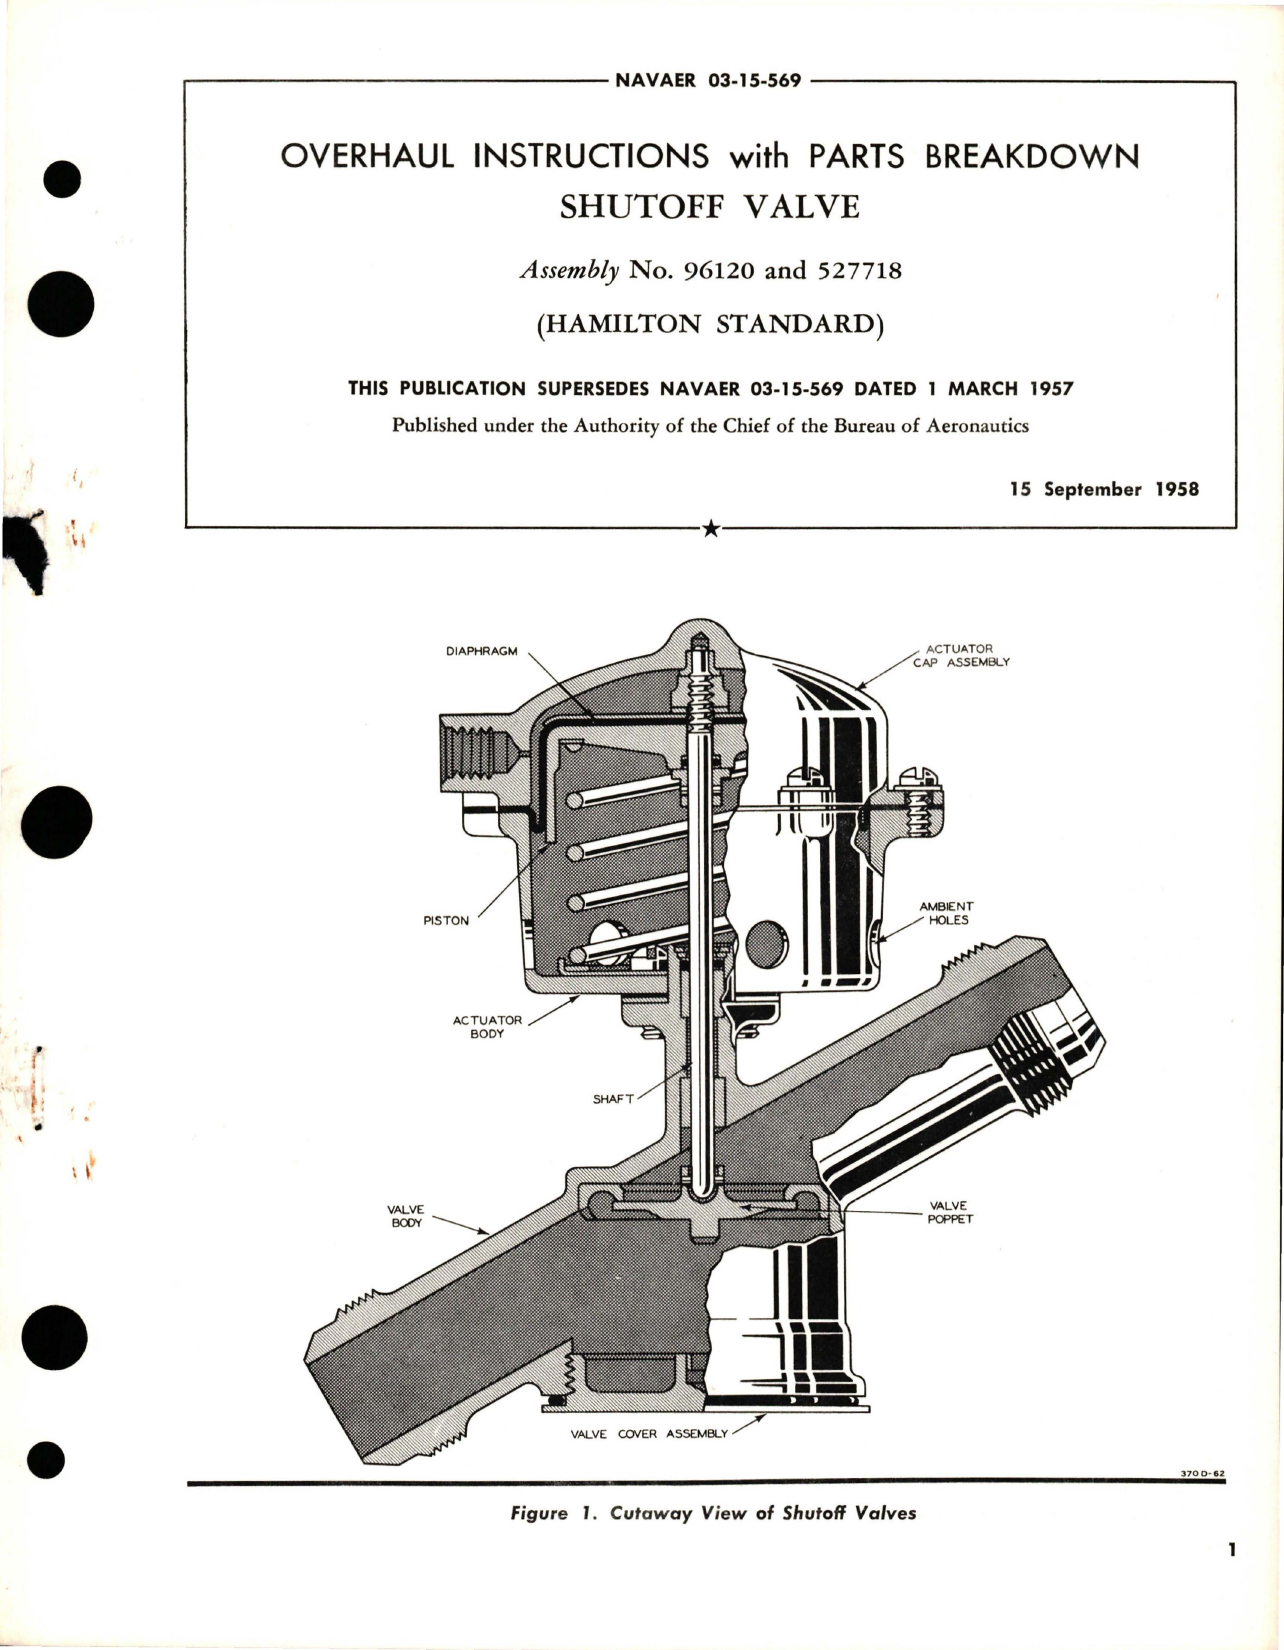 Sample page 1 from AirCorps Library document: Overhaul Instructions with Parts Breakdown for Shutoff Valve - Assembly No. 96120 and 527718